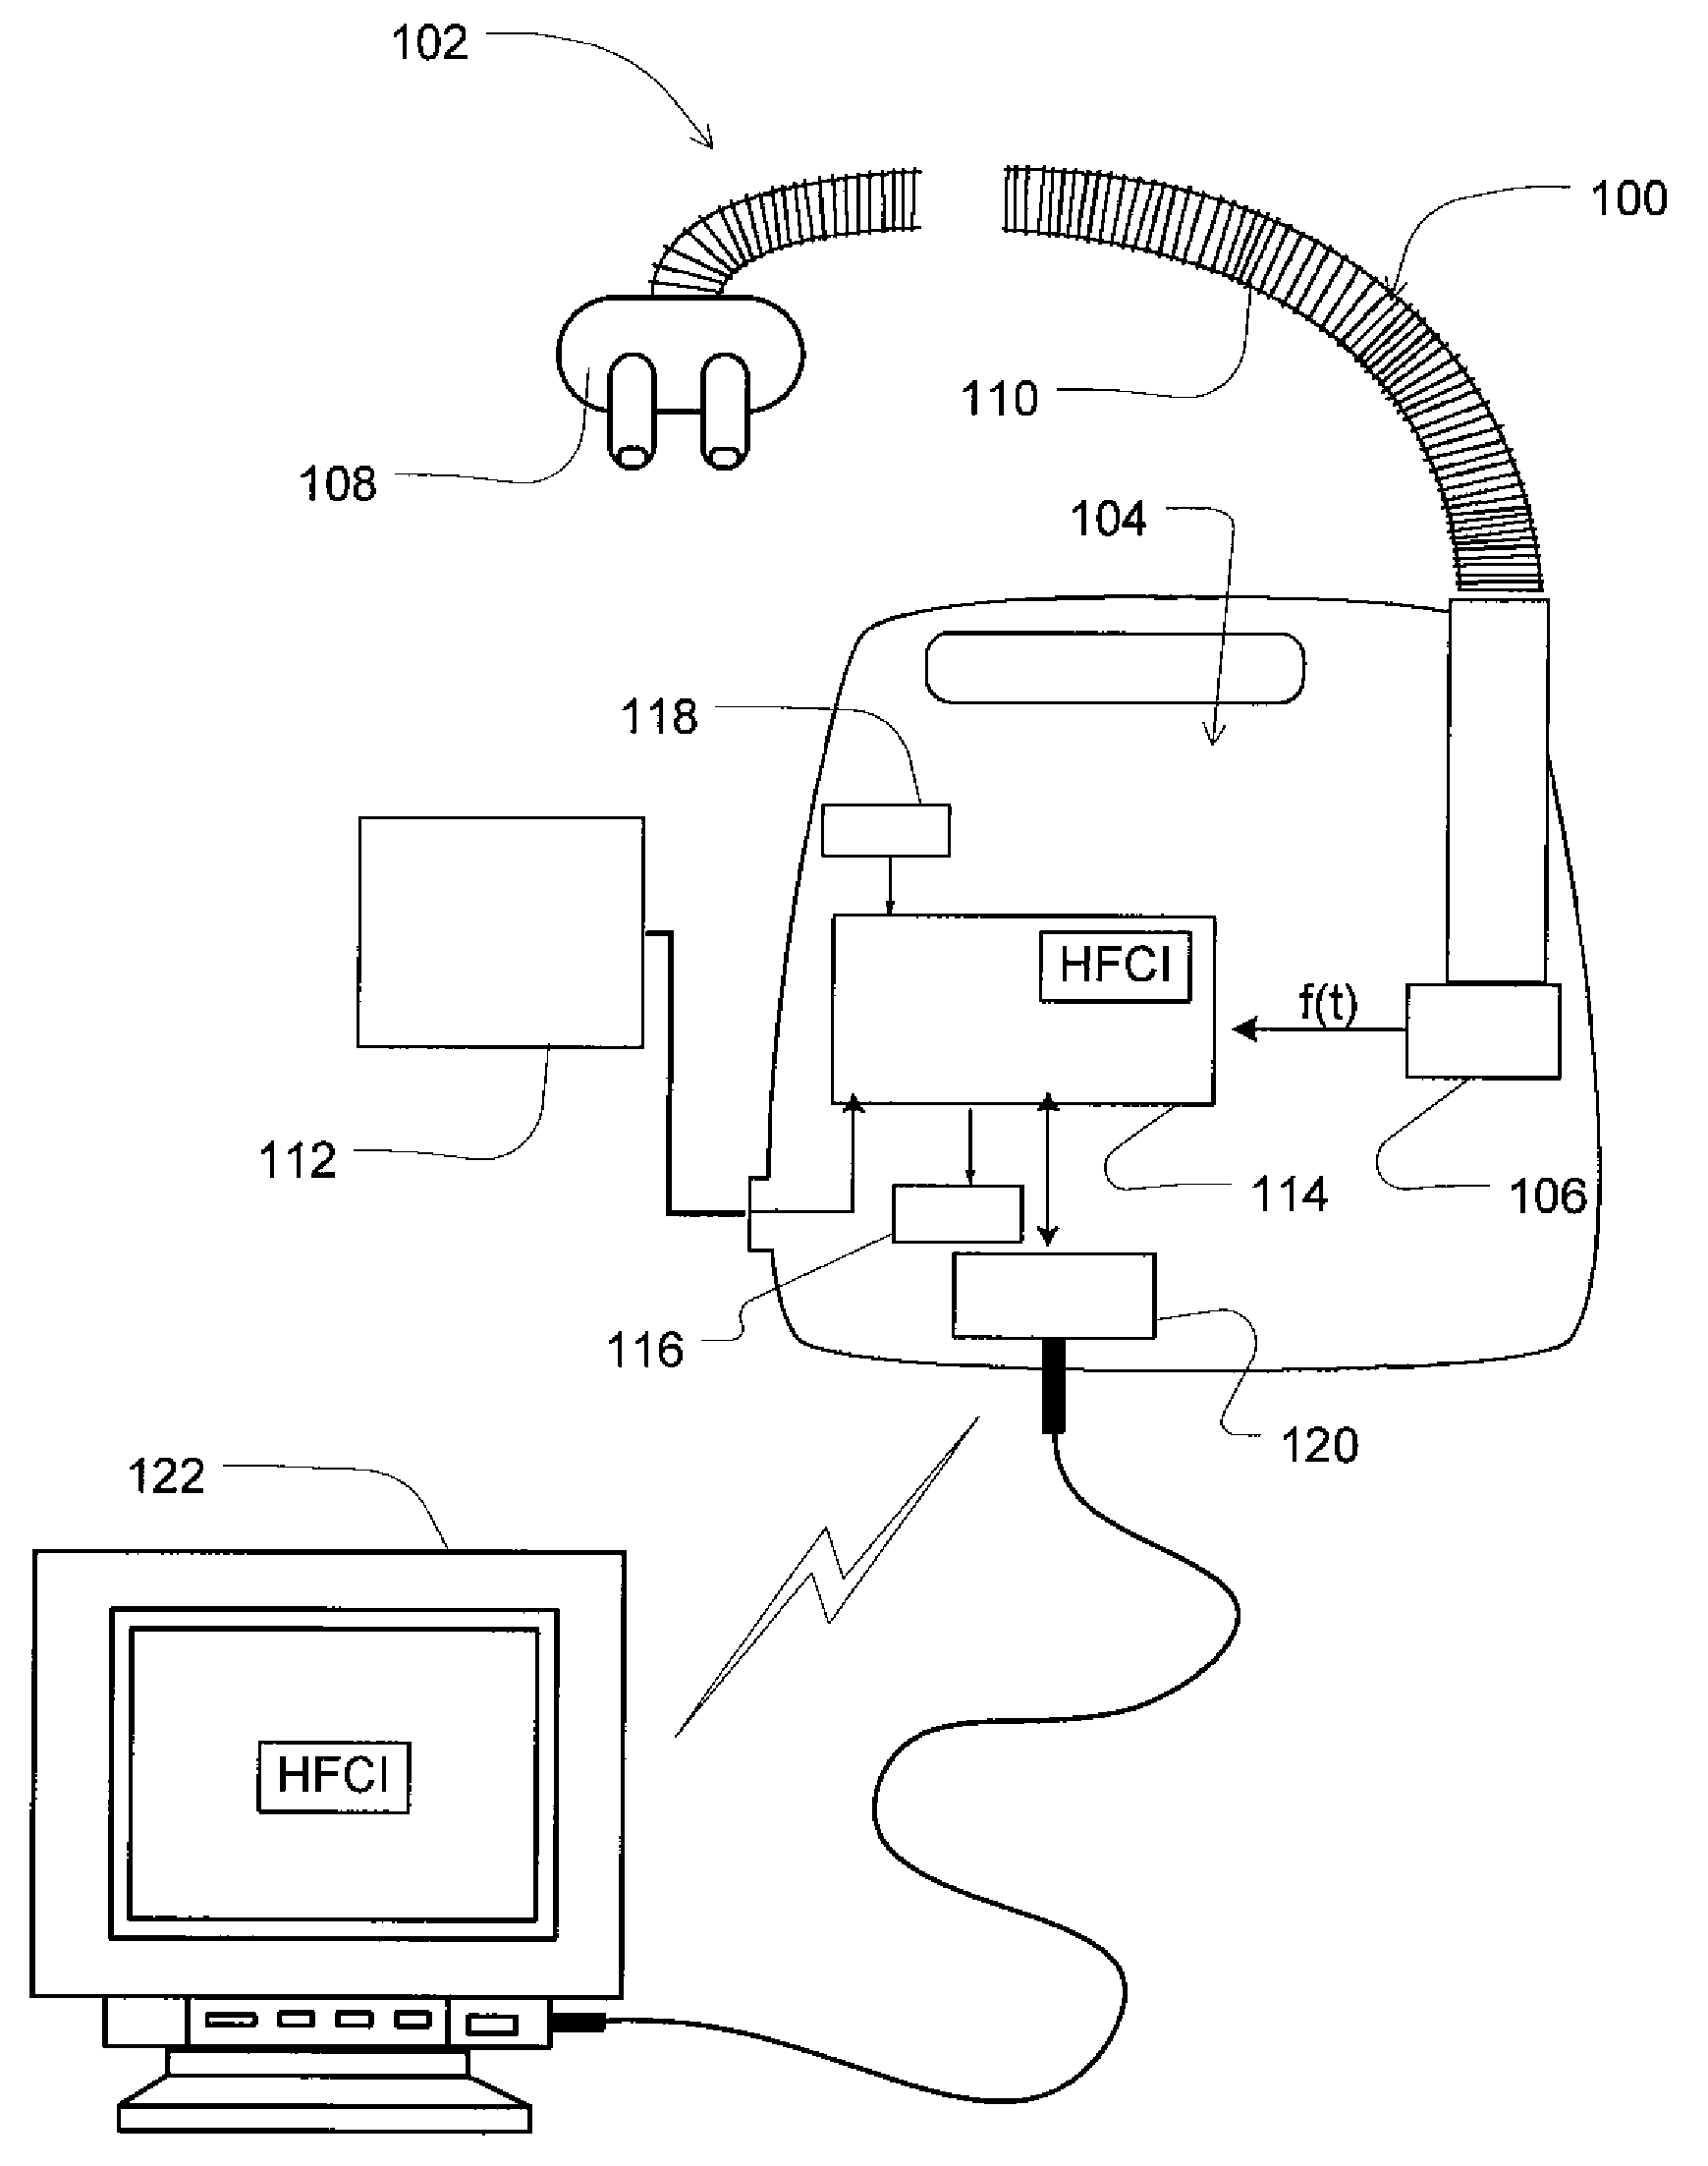 Method and apparatus for detecting and treating heart failure